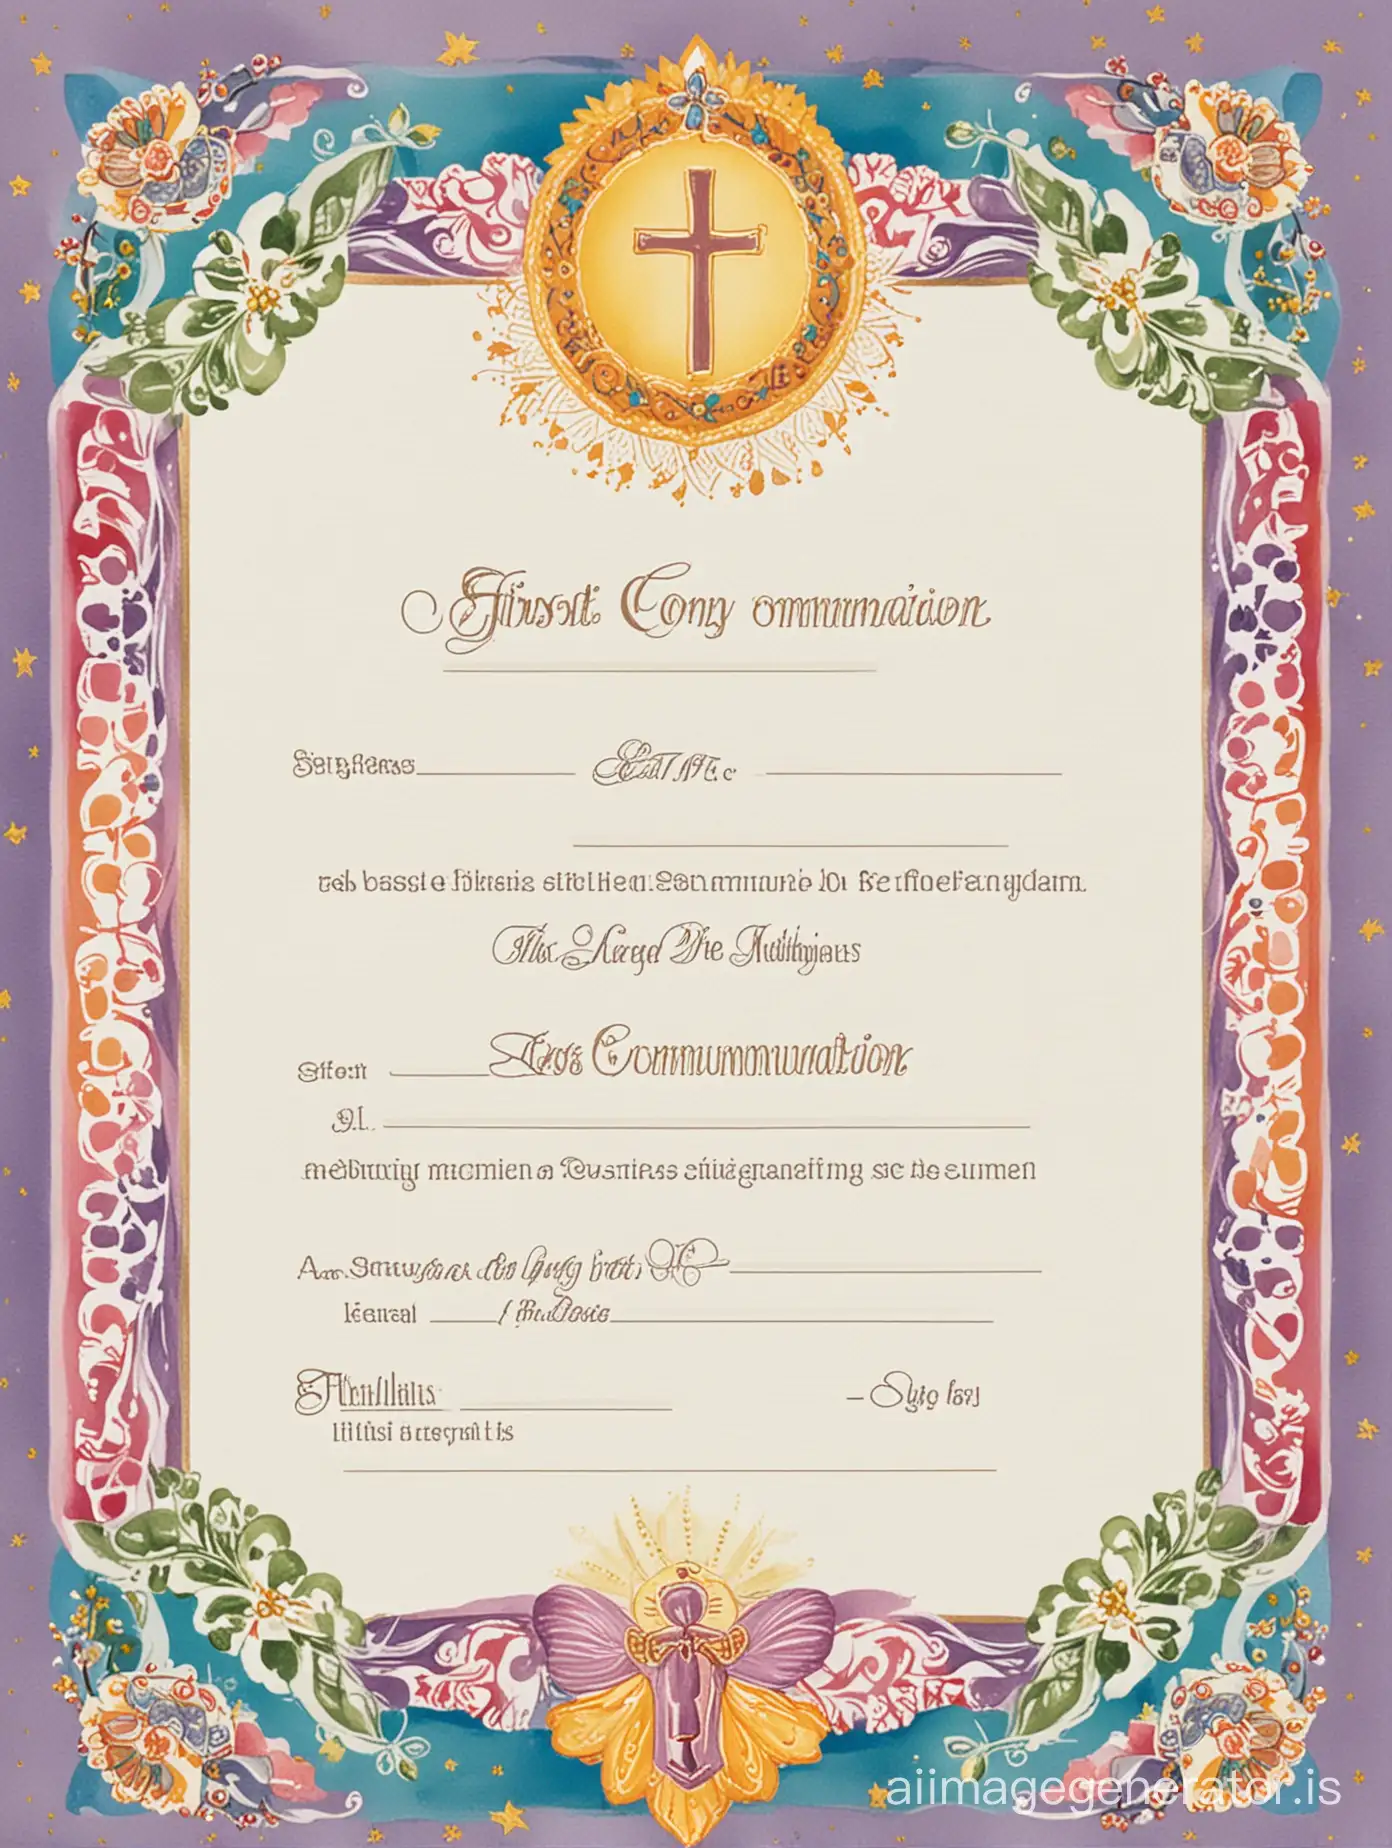 Colorful-First-Communion-Certificate-with-Ornate-Border-Design